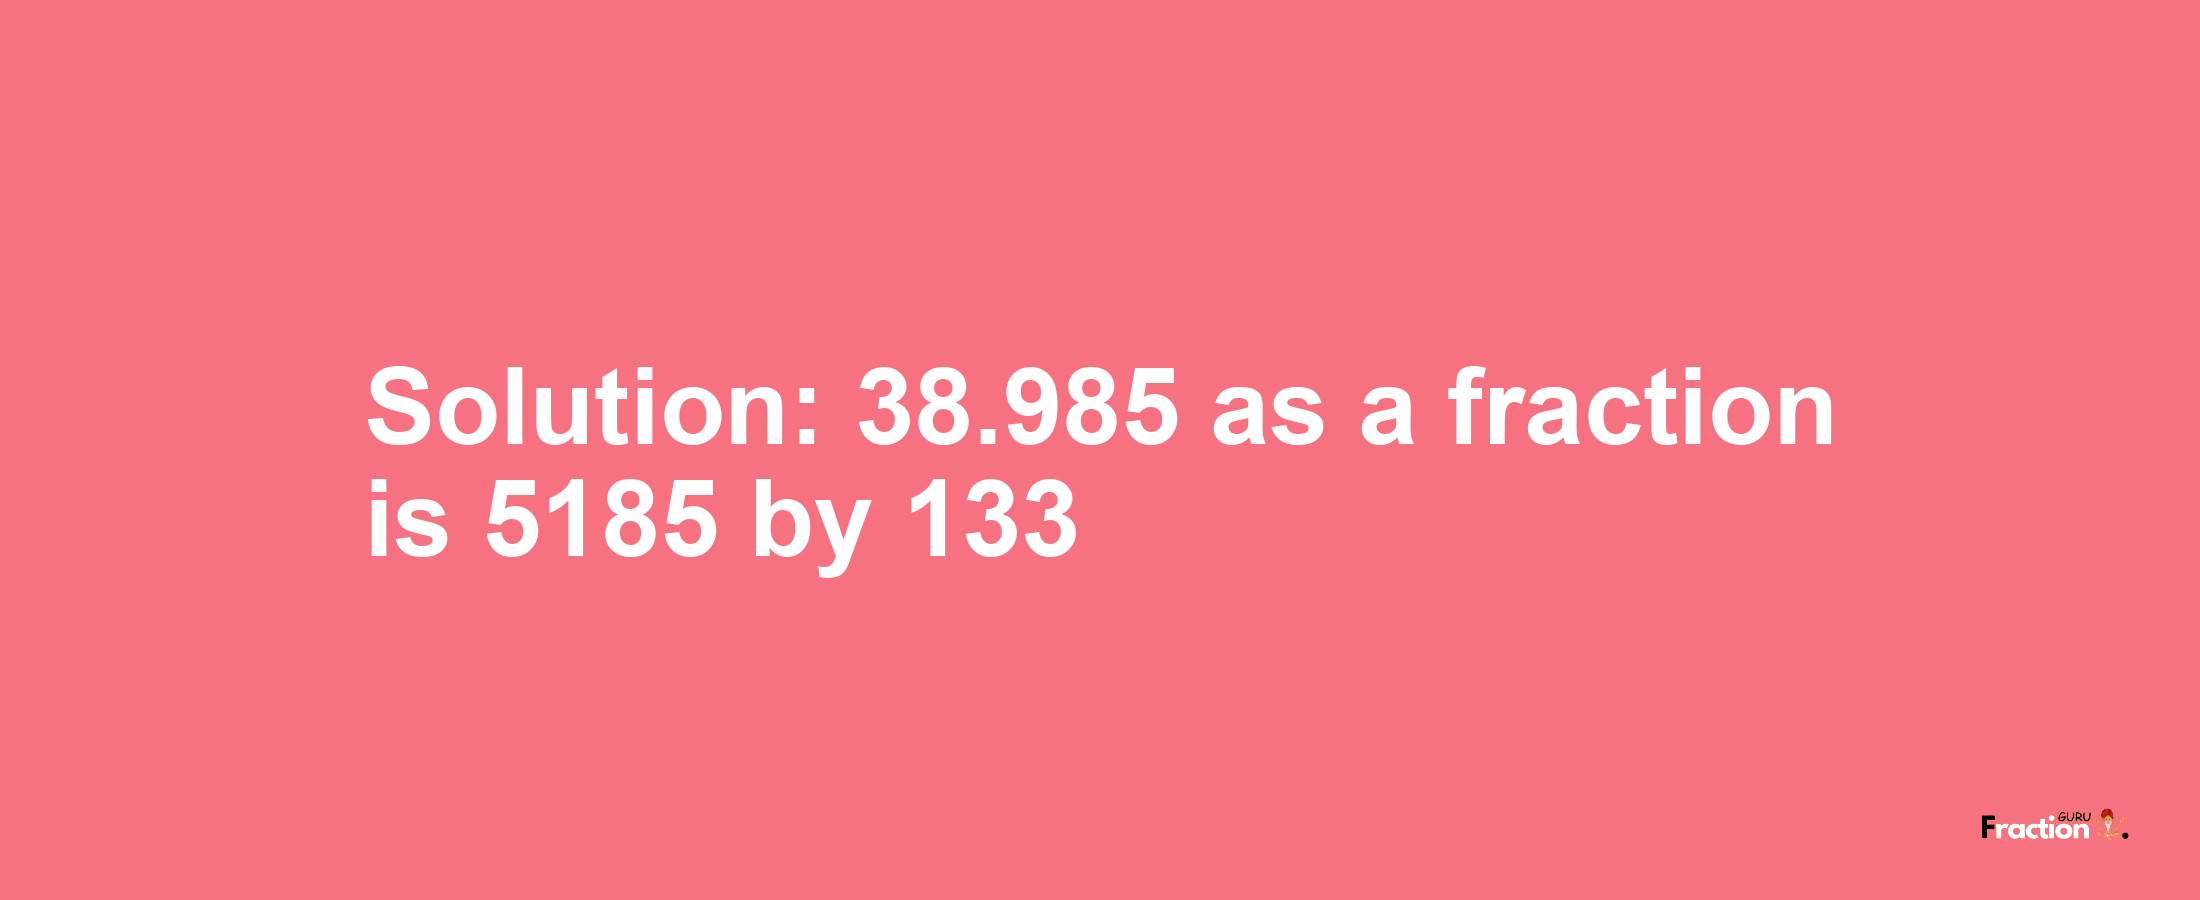 Solution:38.985 as a fraction is 5185/133